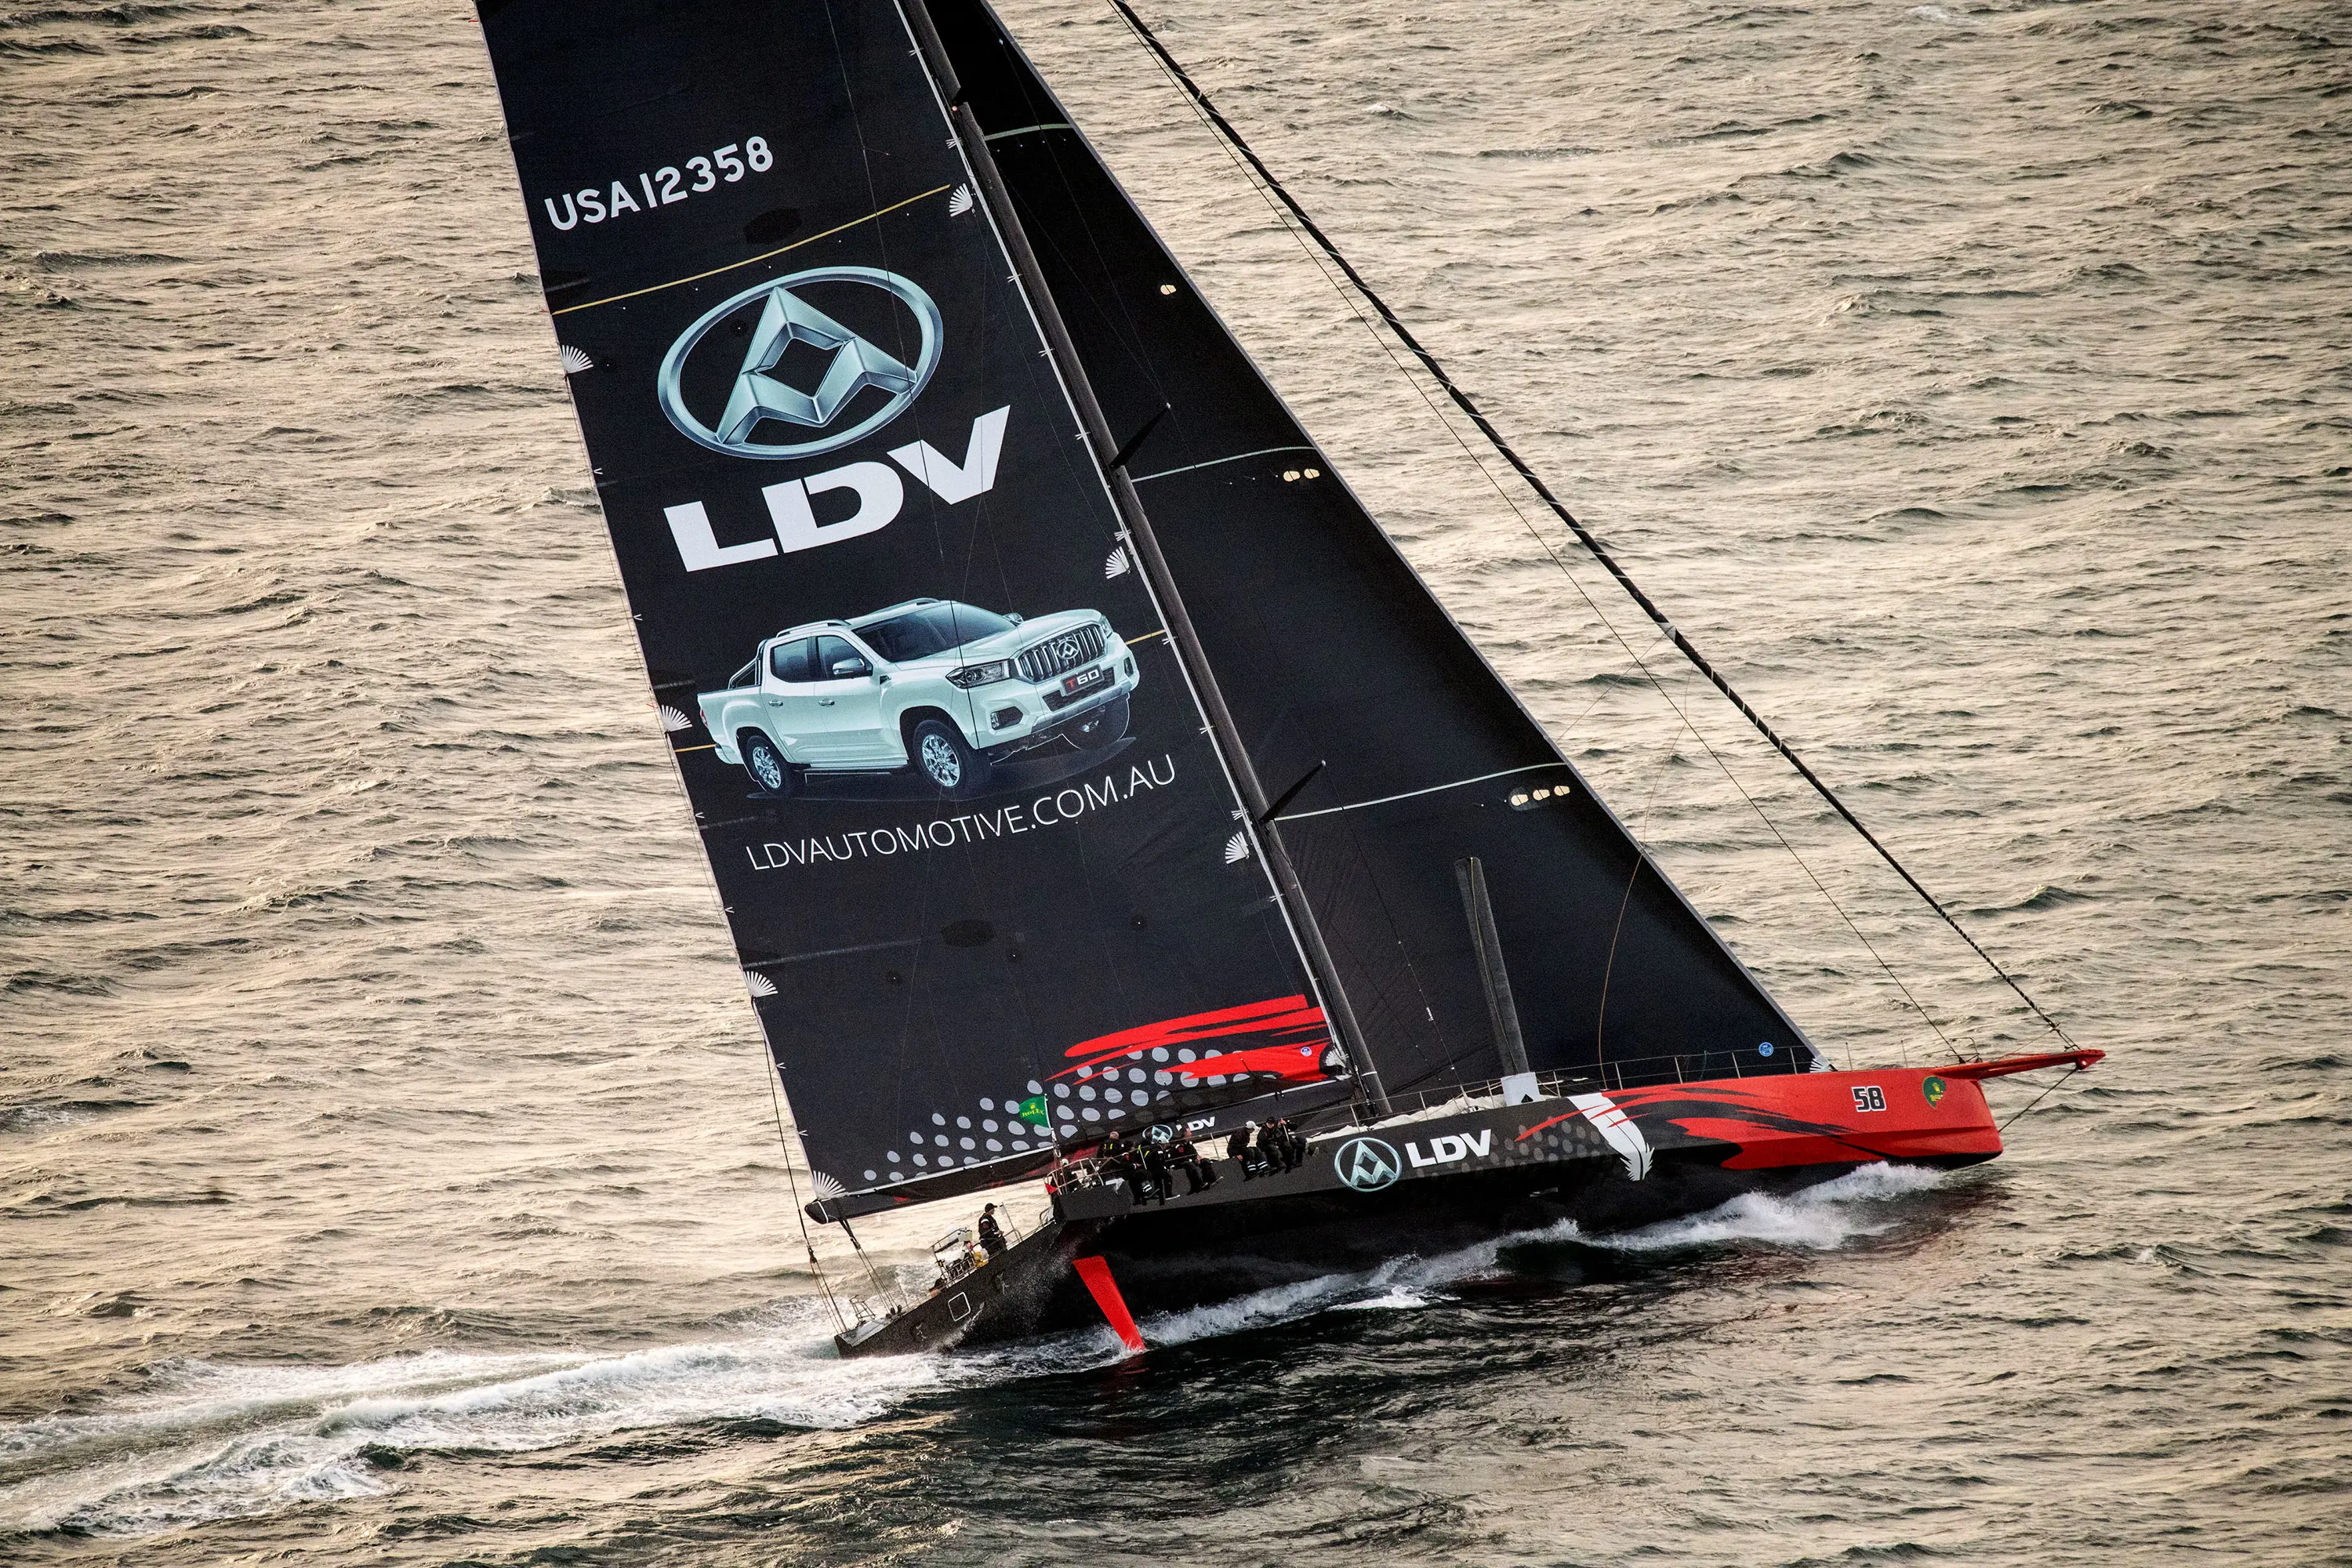 A large racing yacht leans into the waves to make a turn.